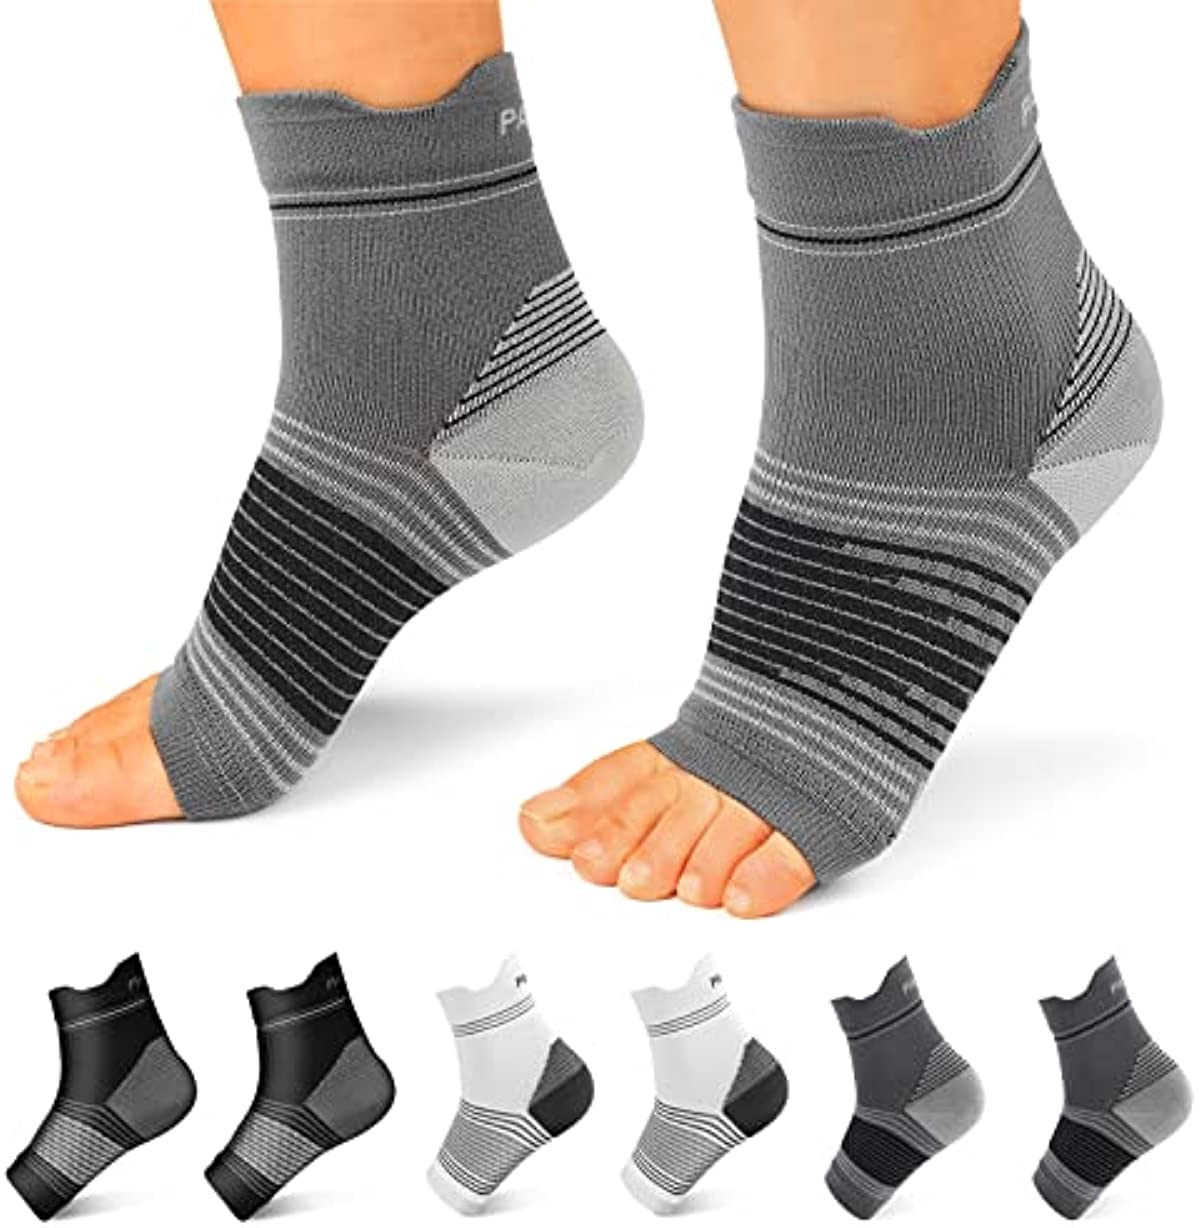 Plantar Fasciitis Sock (6 Pairs) for Men and Women, Compression Foot Sleeves with Arch and Ankle Support (Black, Gray, White, Medium)